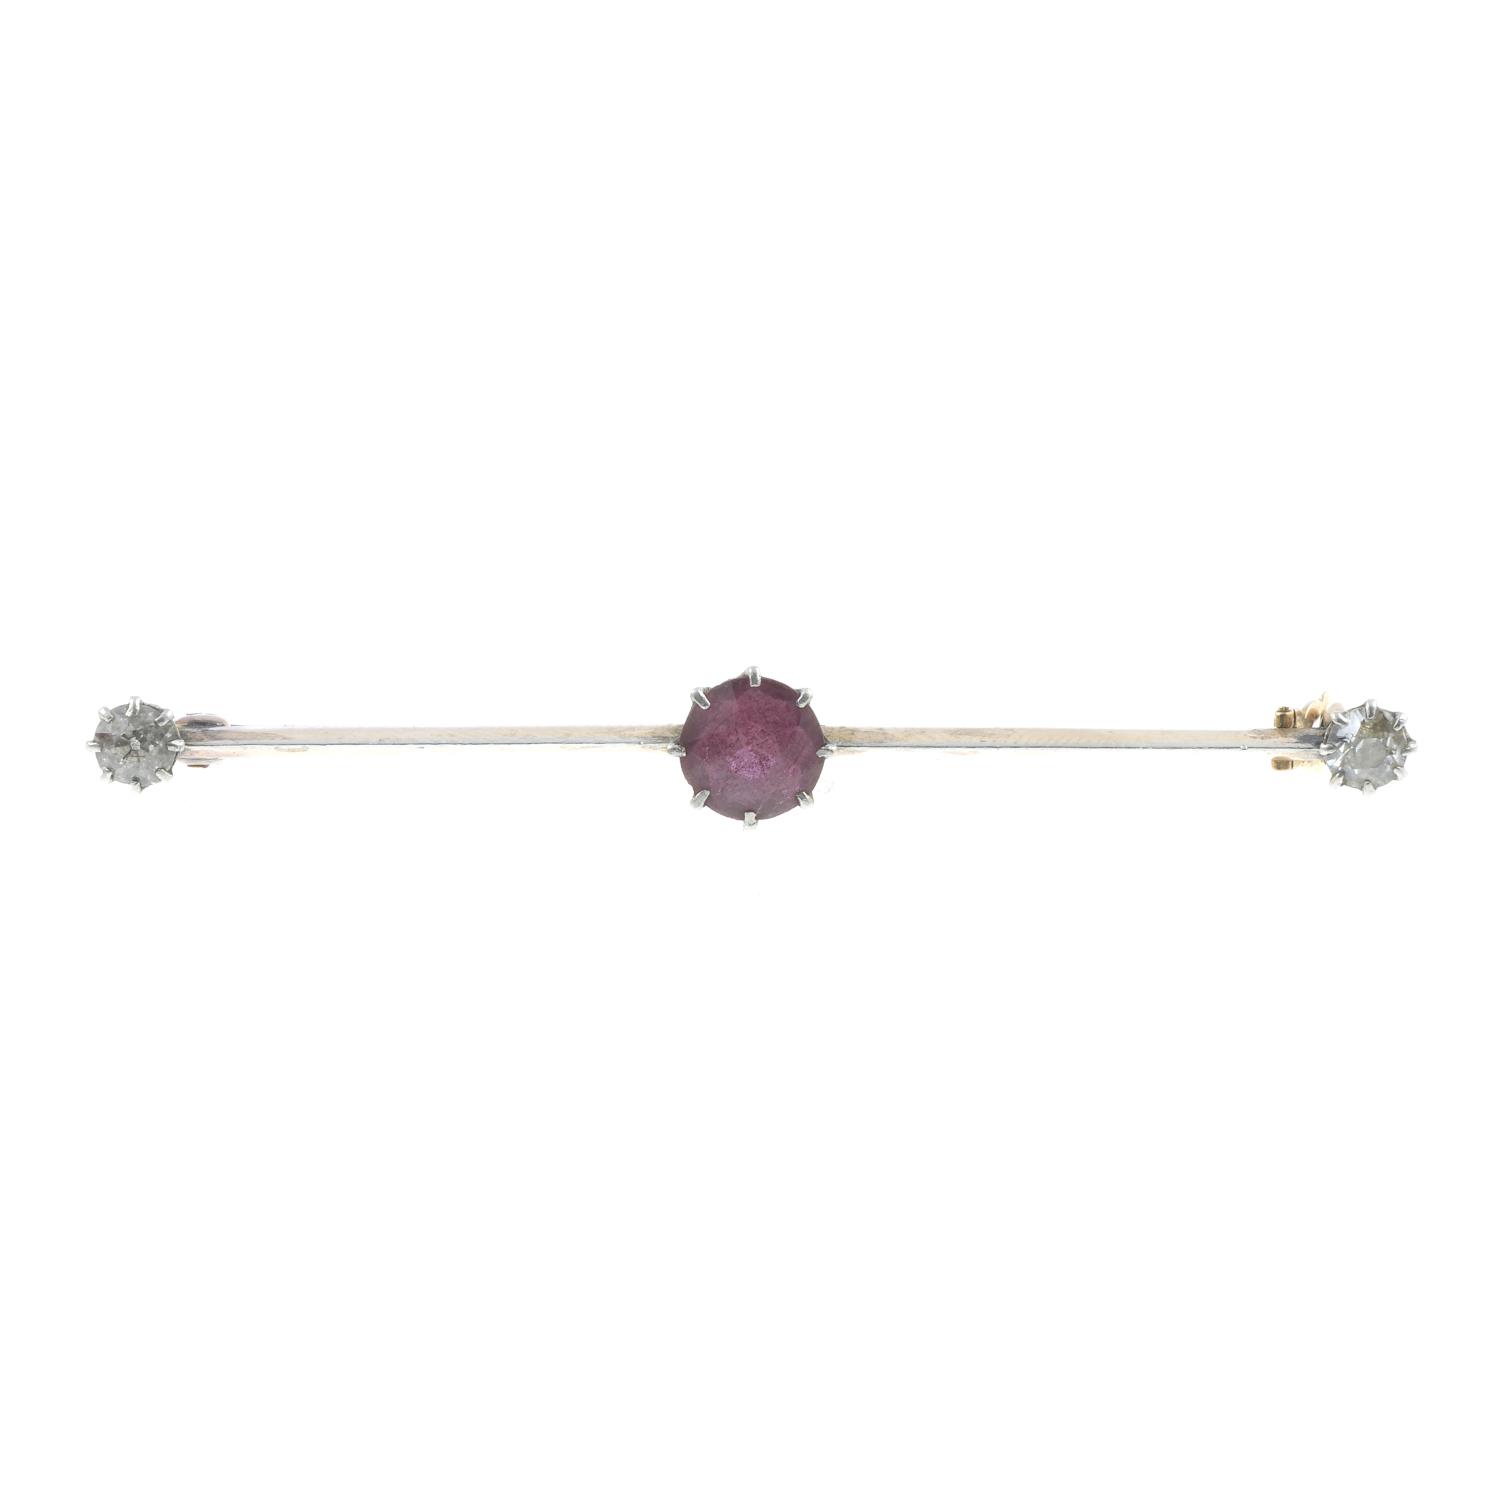 An early 20th century platinum and gold pink tourmaline and diamond bar brooch.Estimated total